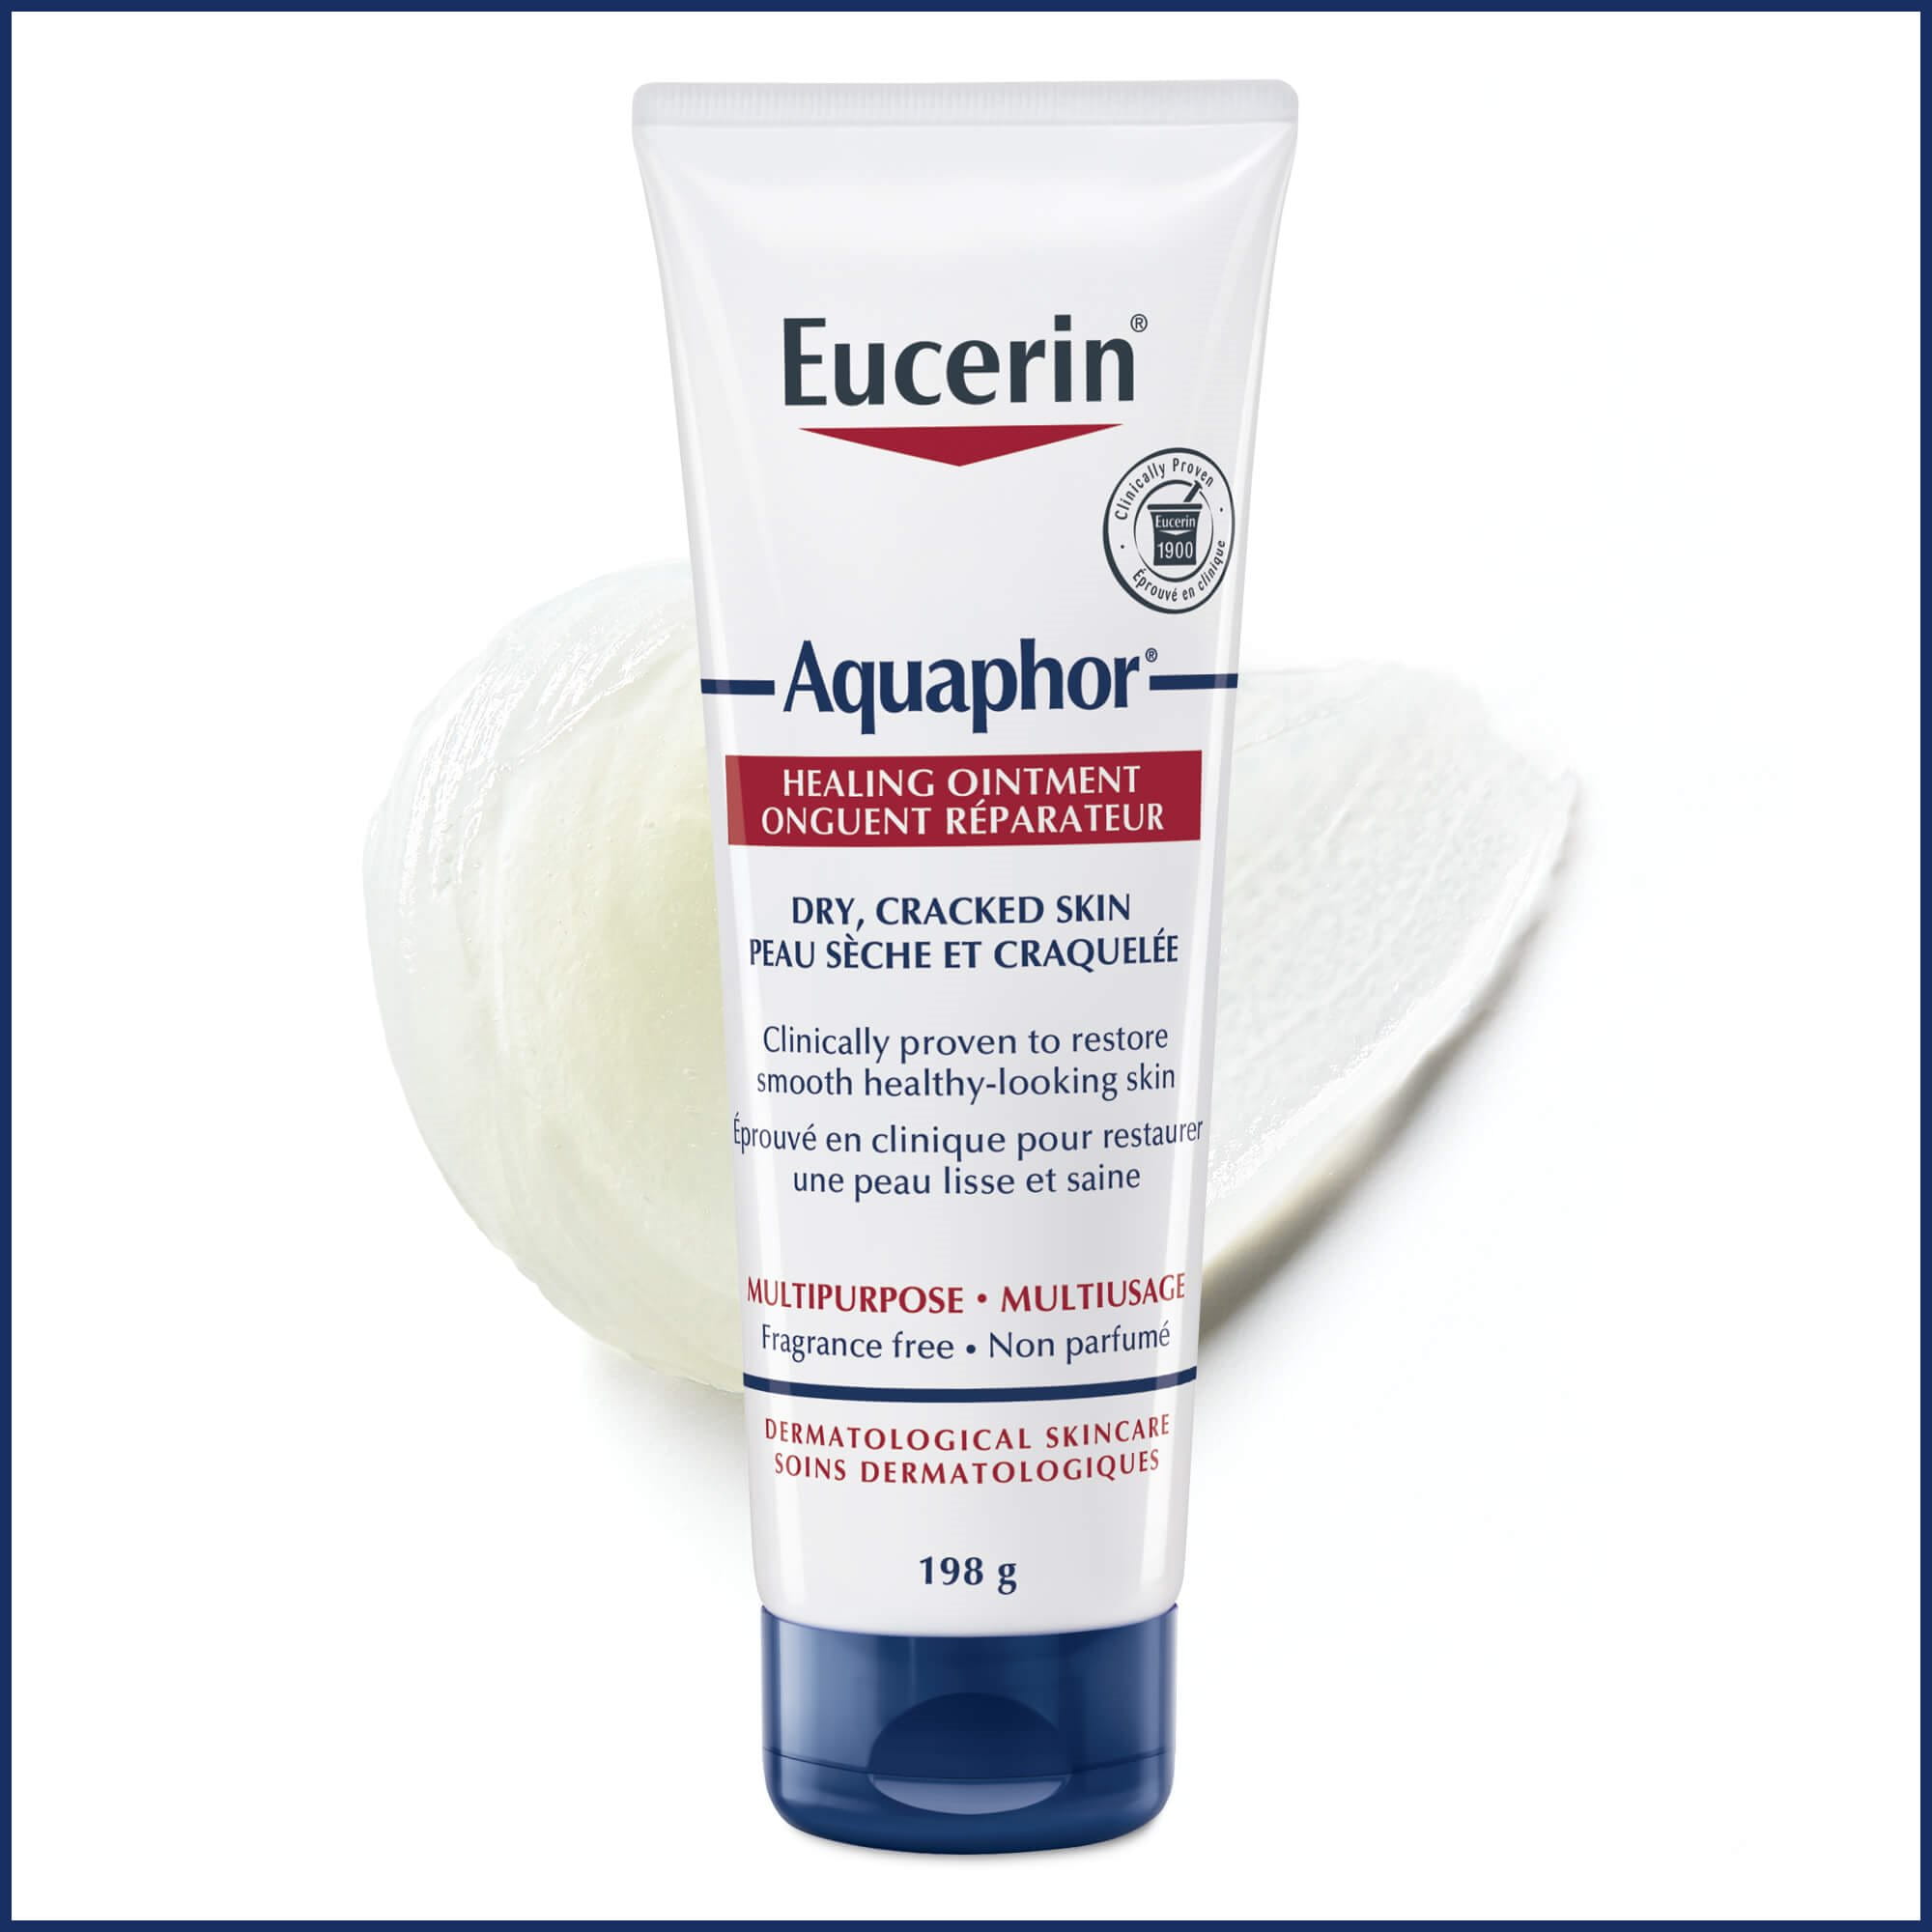 198g tube of Eucerin Aquaphor overlaid upon an image of the ointment texture